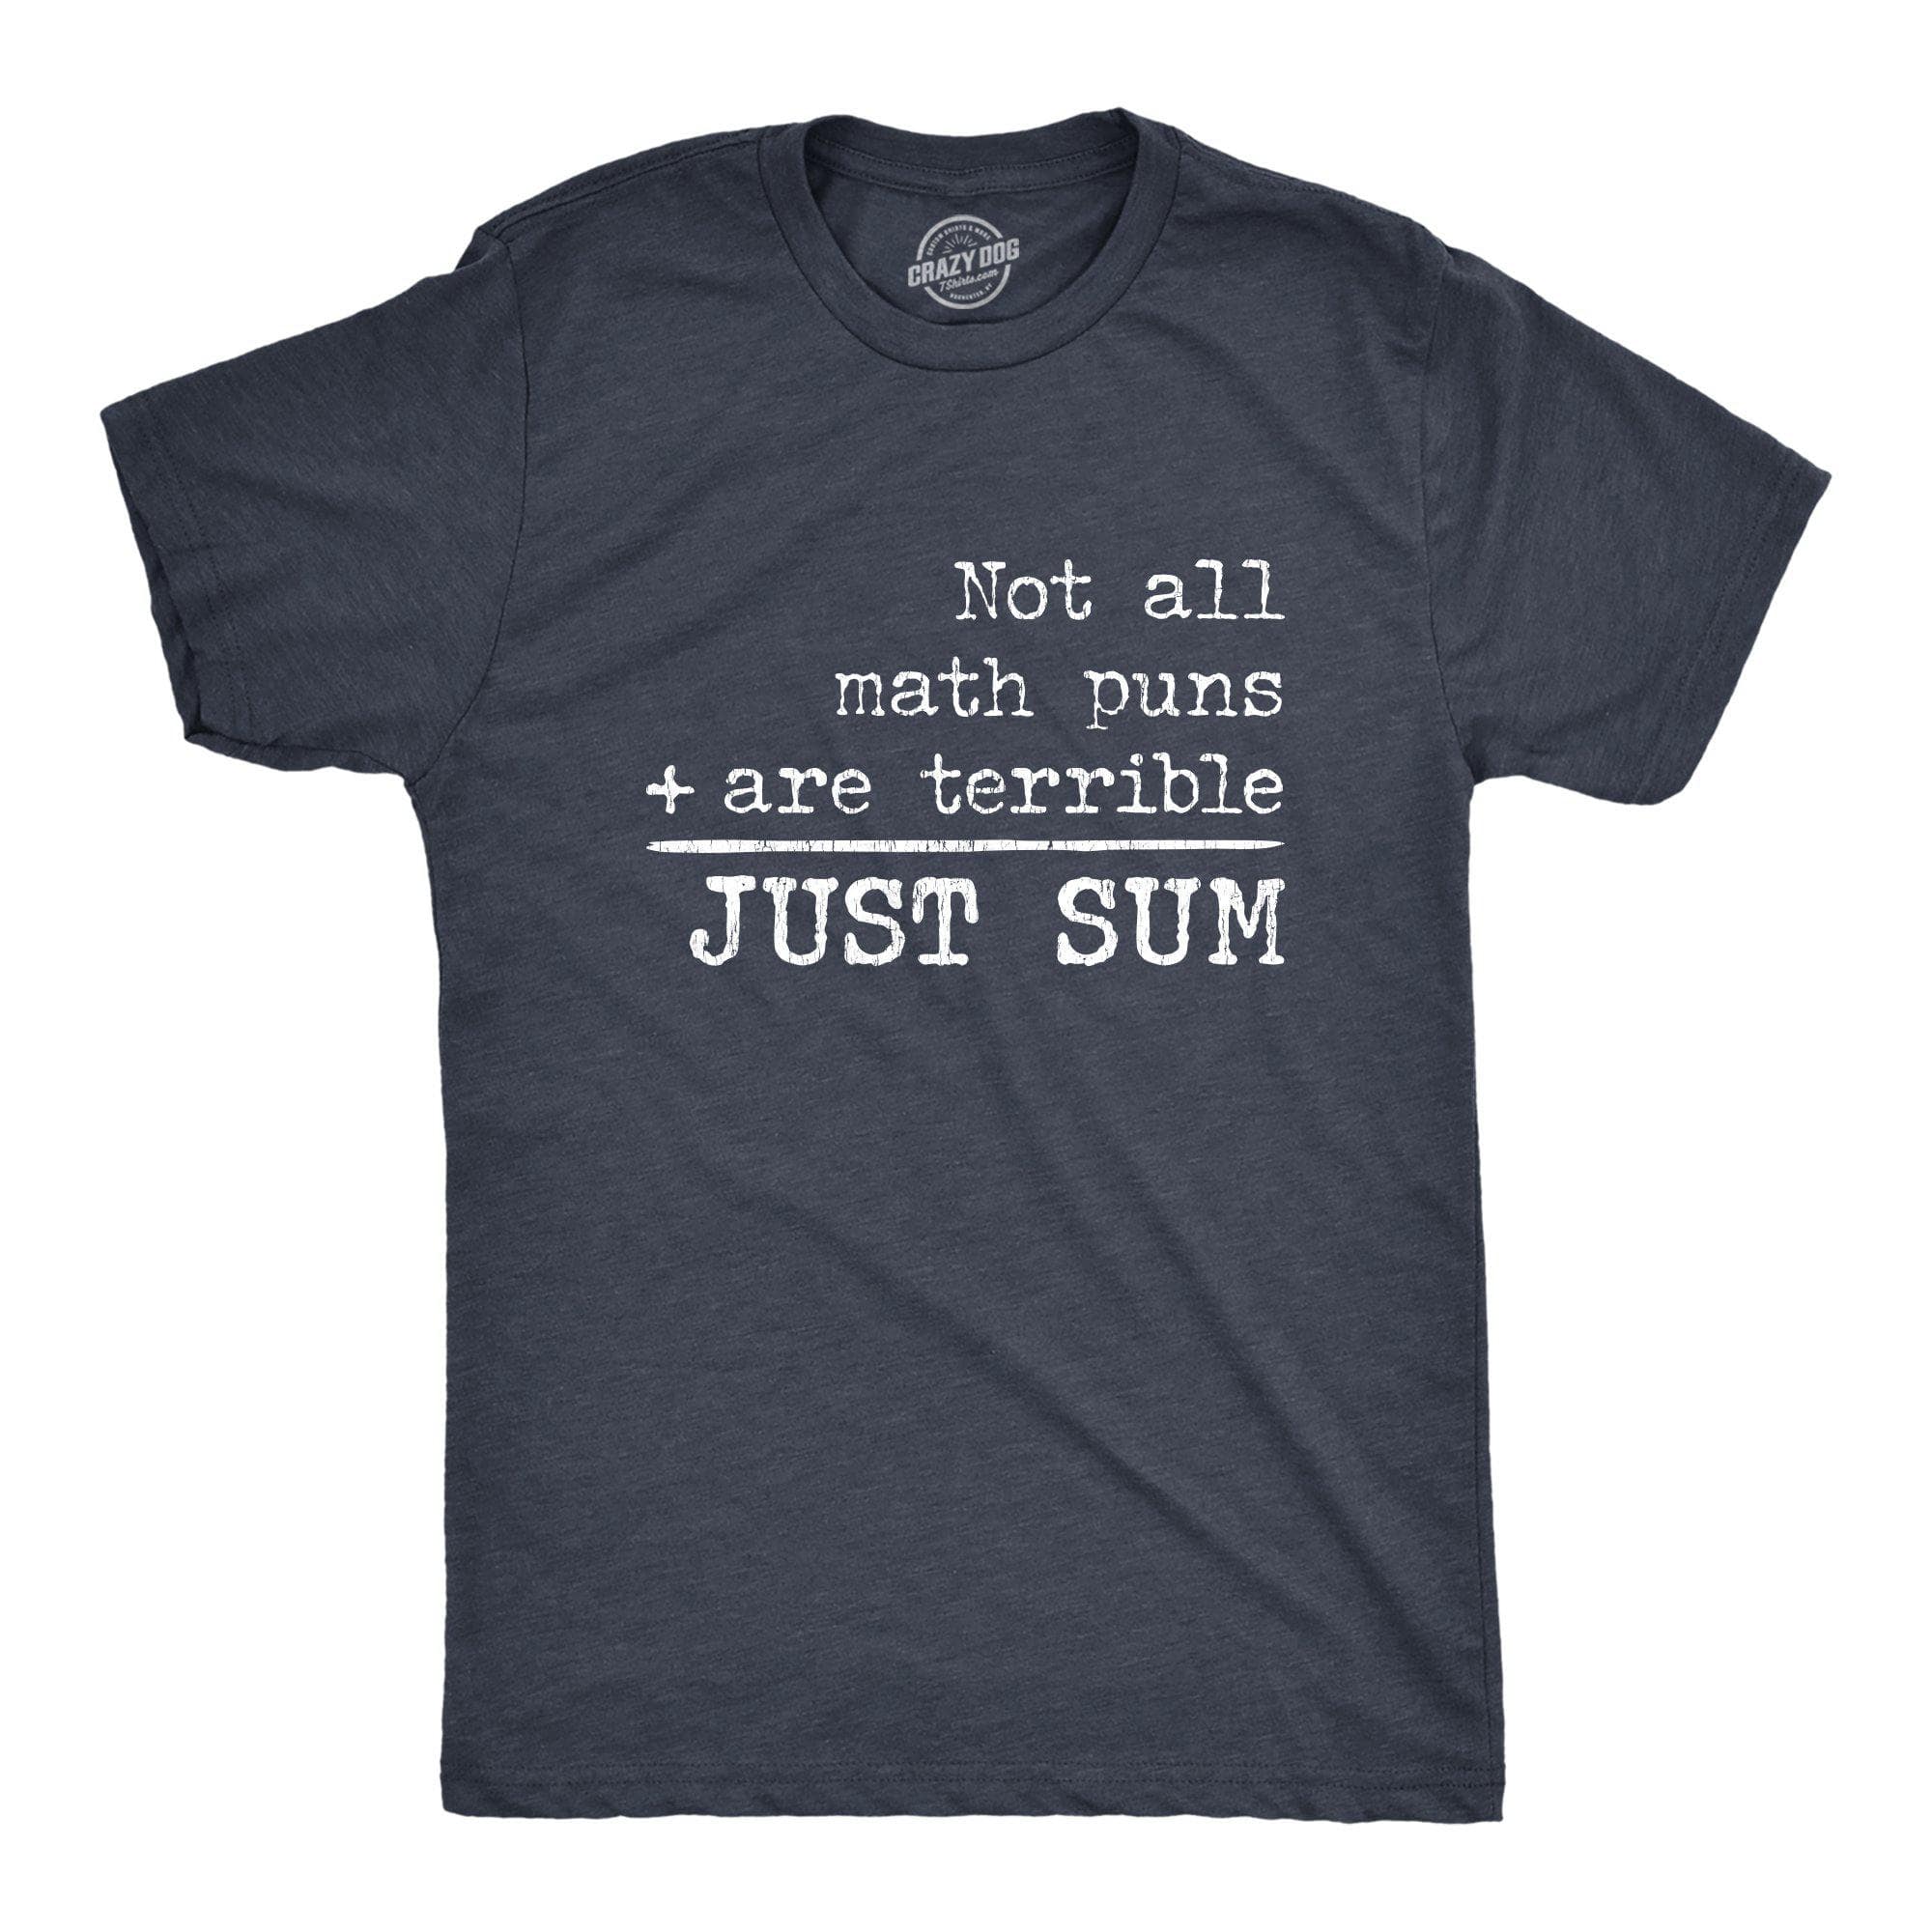 Not All Math Puns Are Terrible Just Sum Men's Tshirt - Crazy Dog T-Shirts